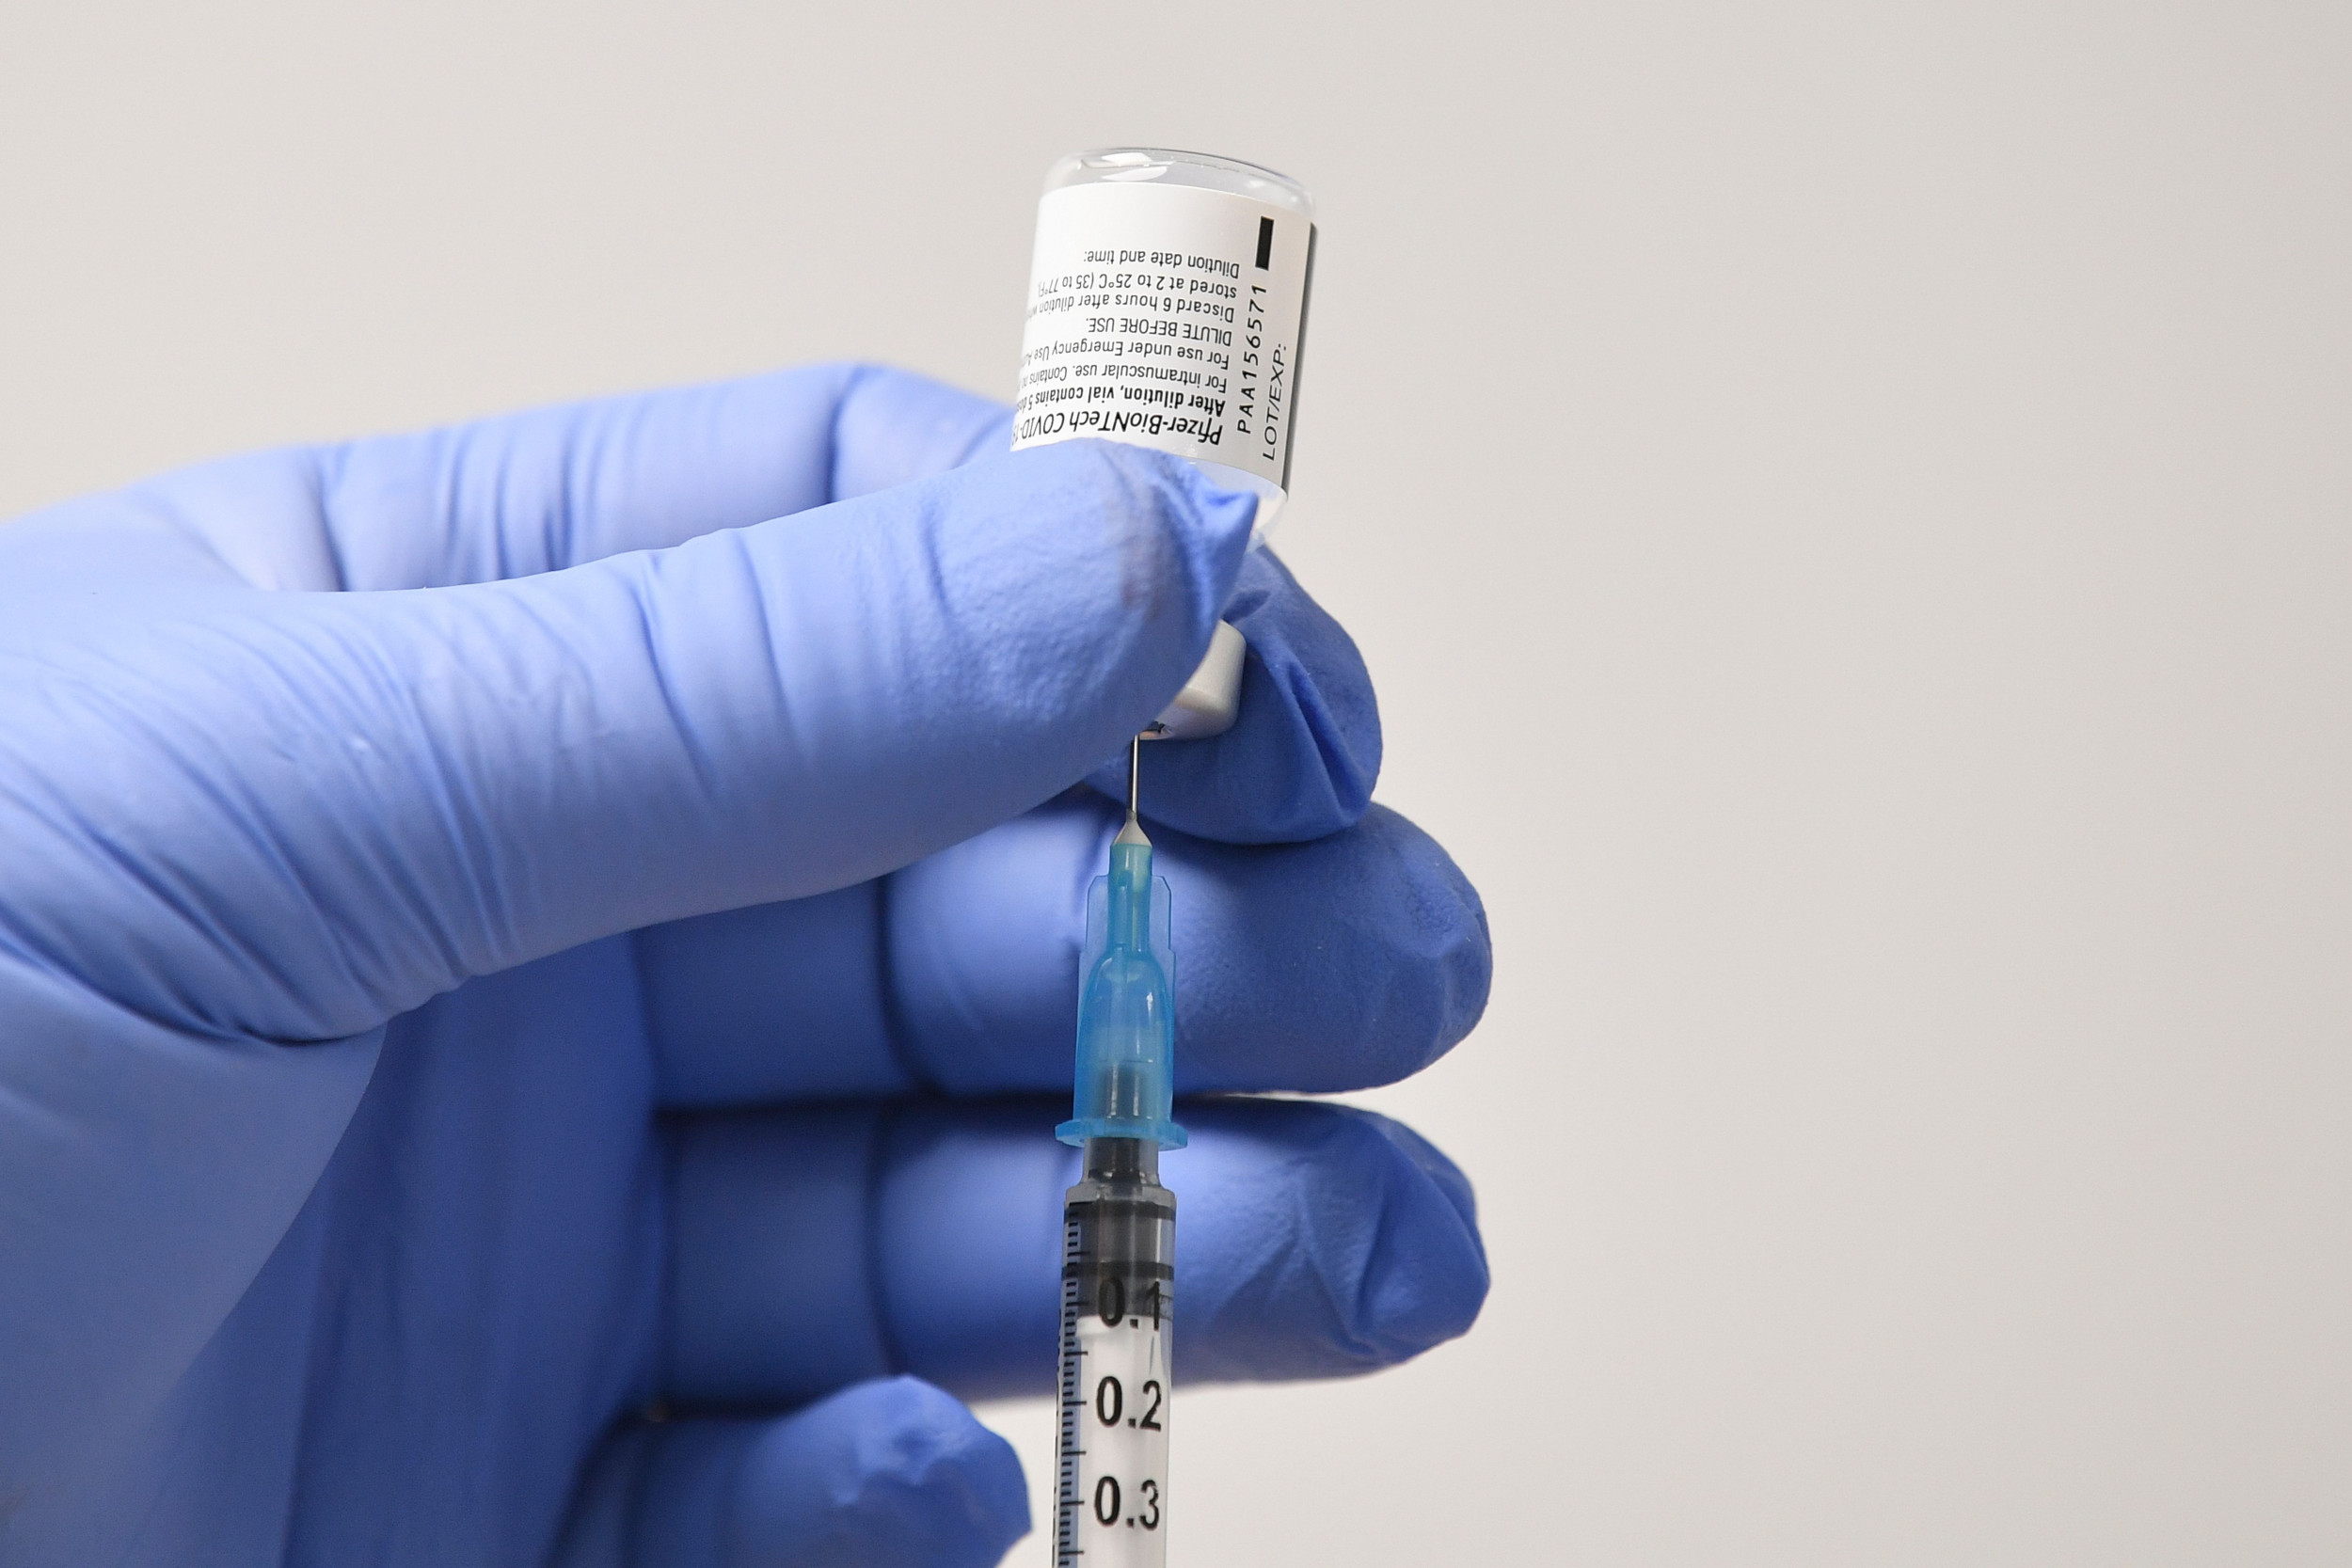 Several People in Scotland Accidentally Received Twice the Normal COVID-19 Vaccine Dose